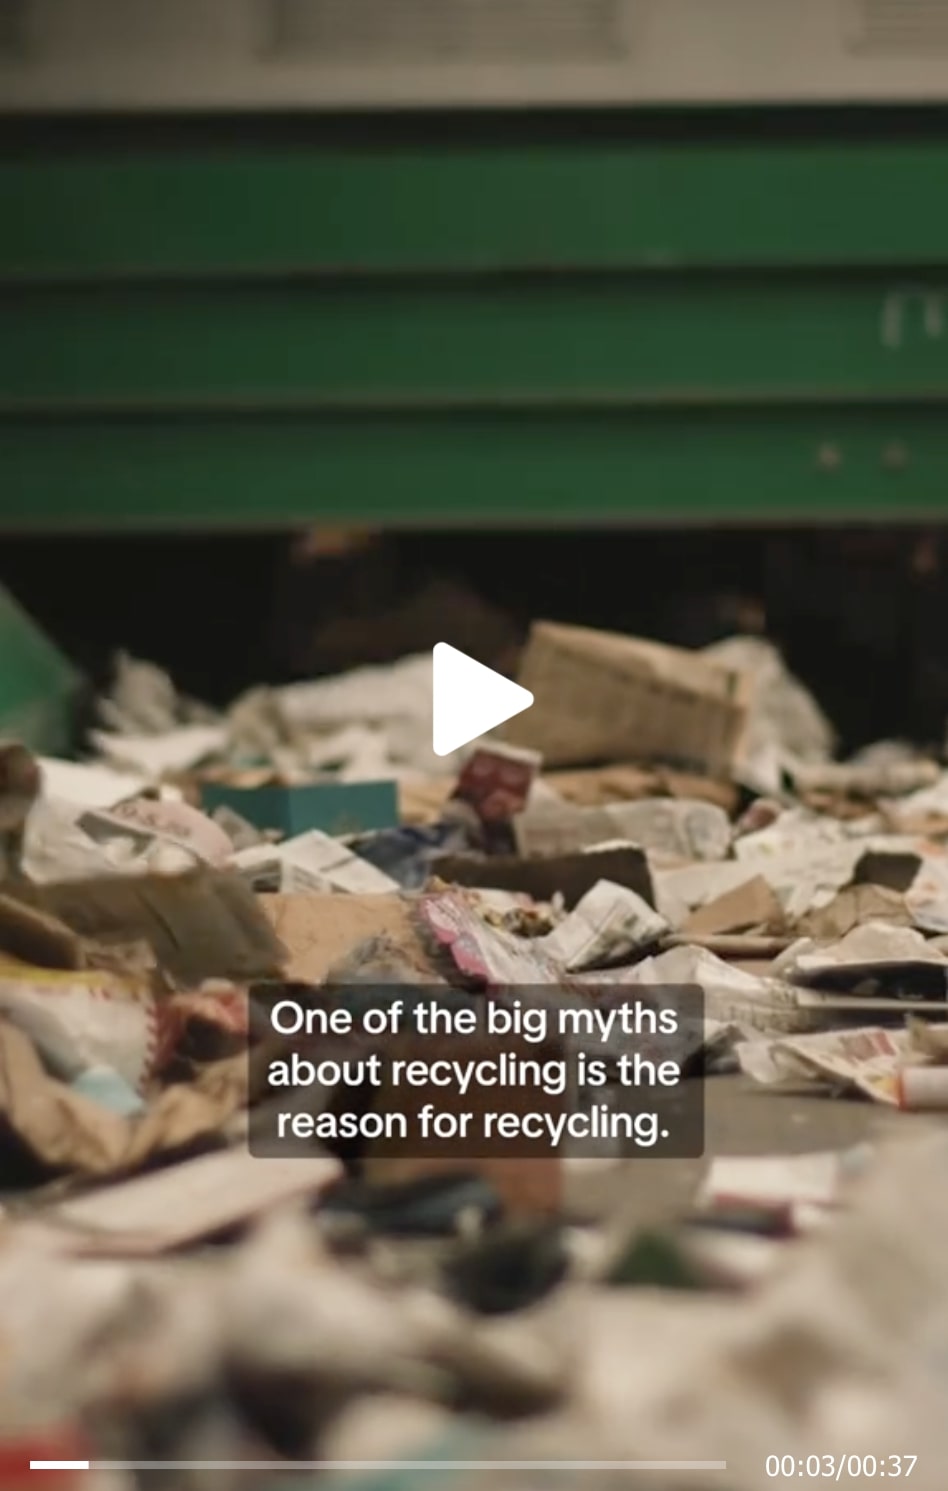 Patagonia's TikTok video on the importance of recycling